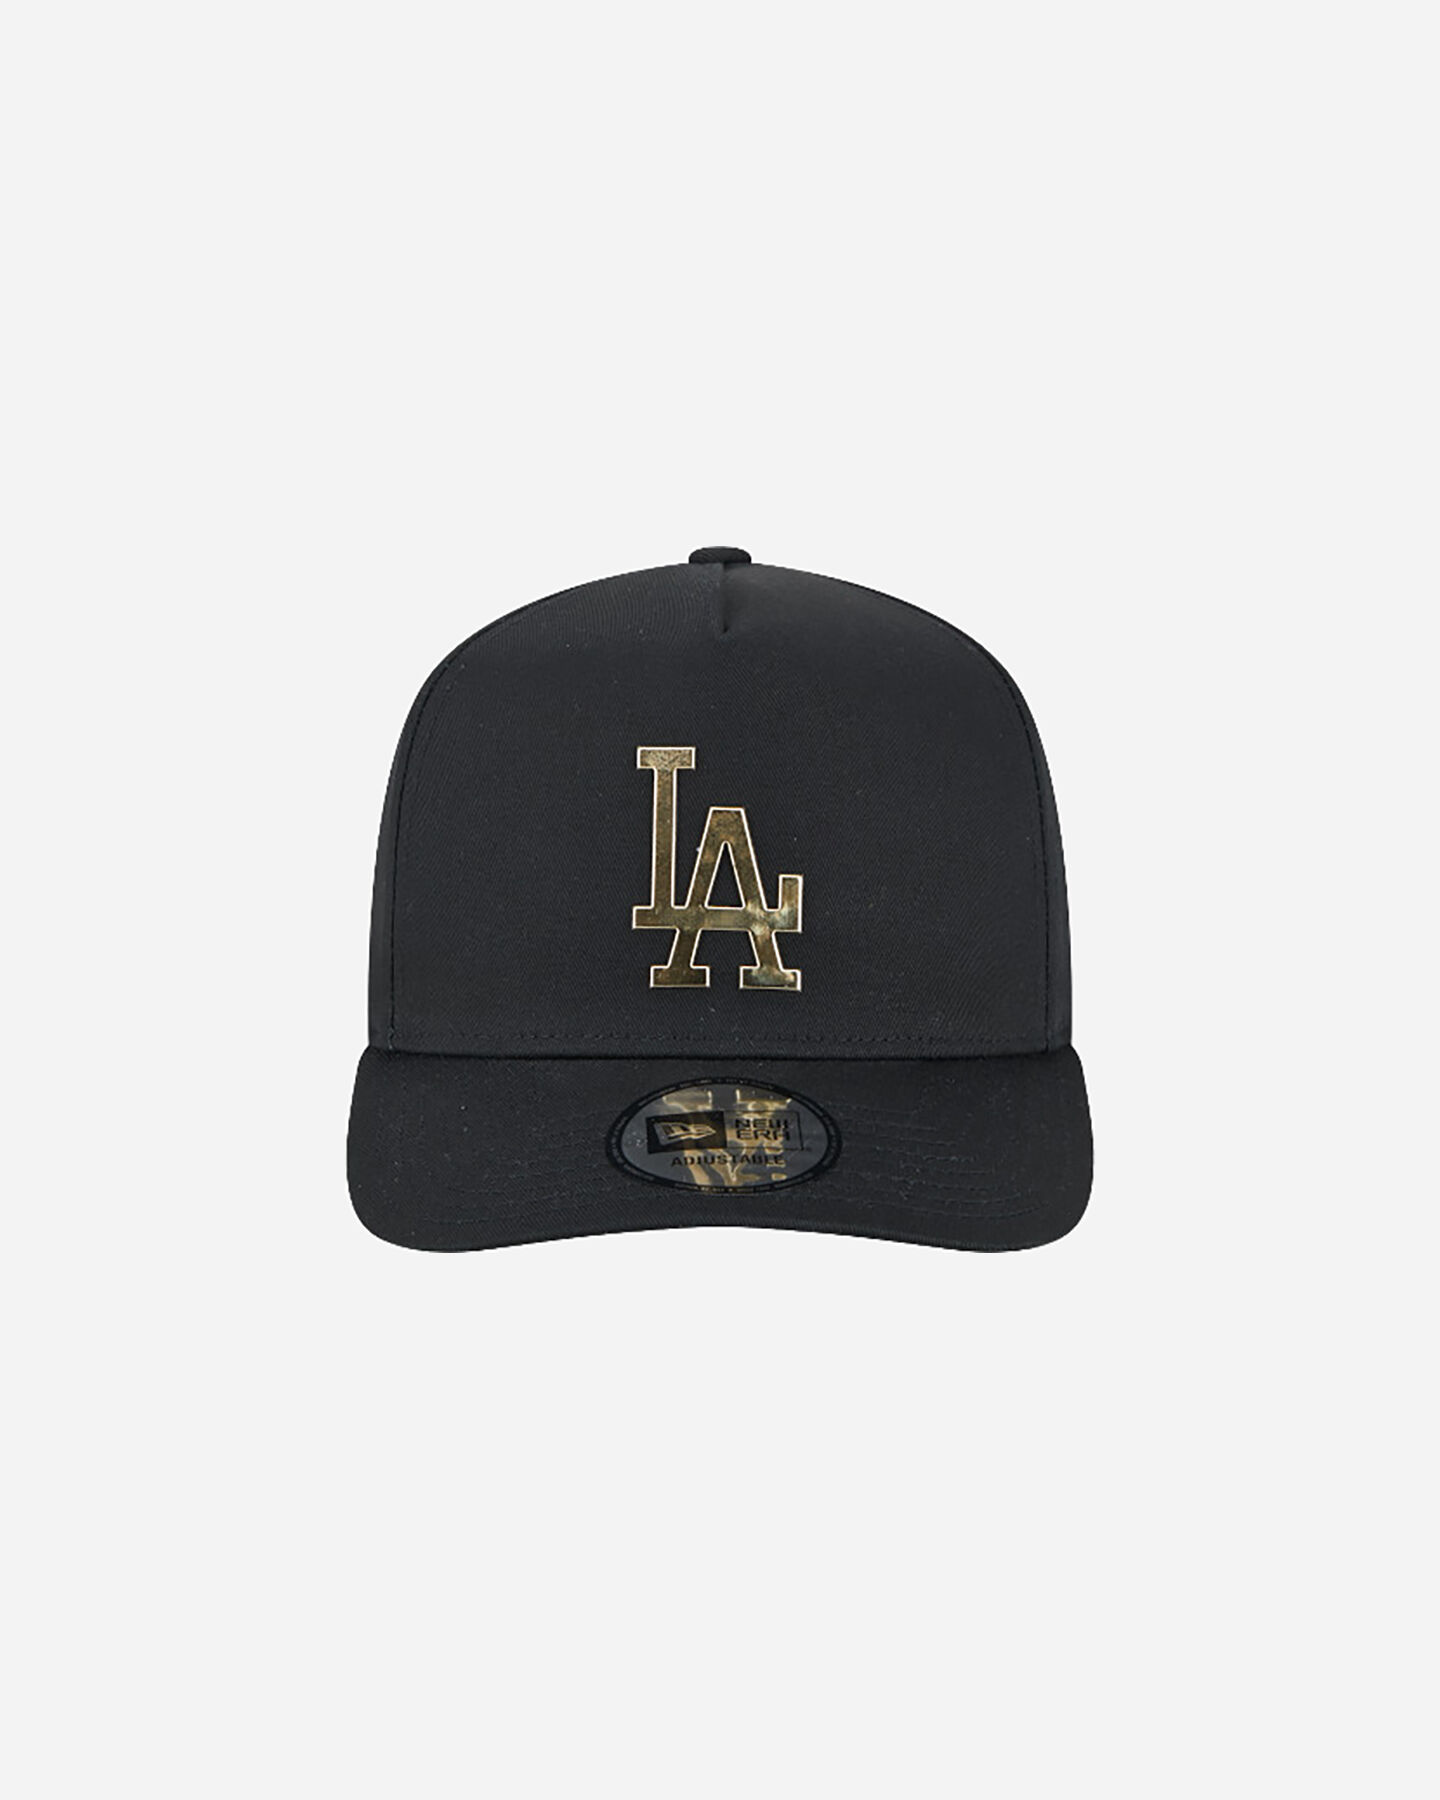  Cappellino NEW ERA 9FORTY MLB EFRAME FOIL LOS ANGELES DODGERS  S5630876|001|OSFM scatto 1